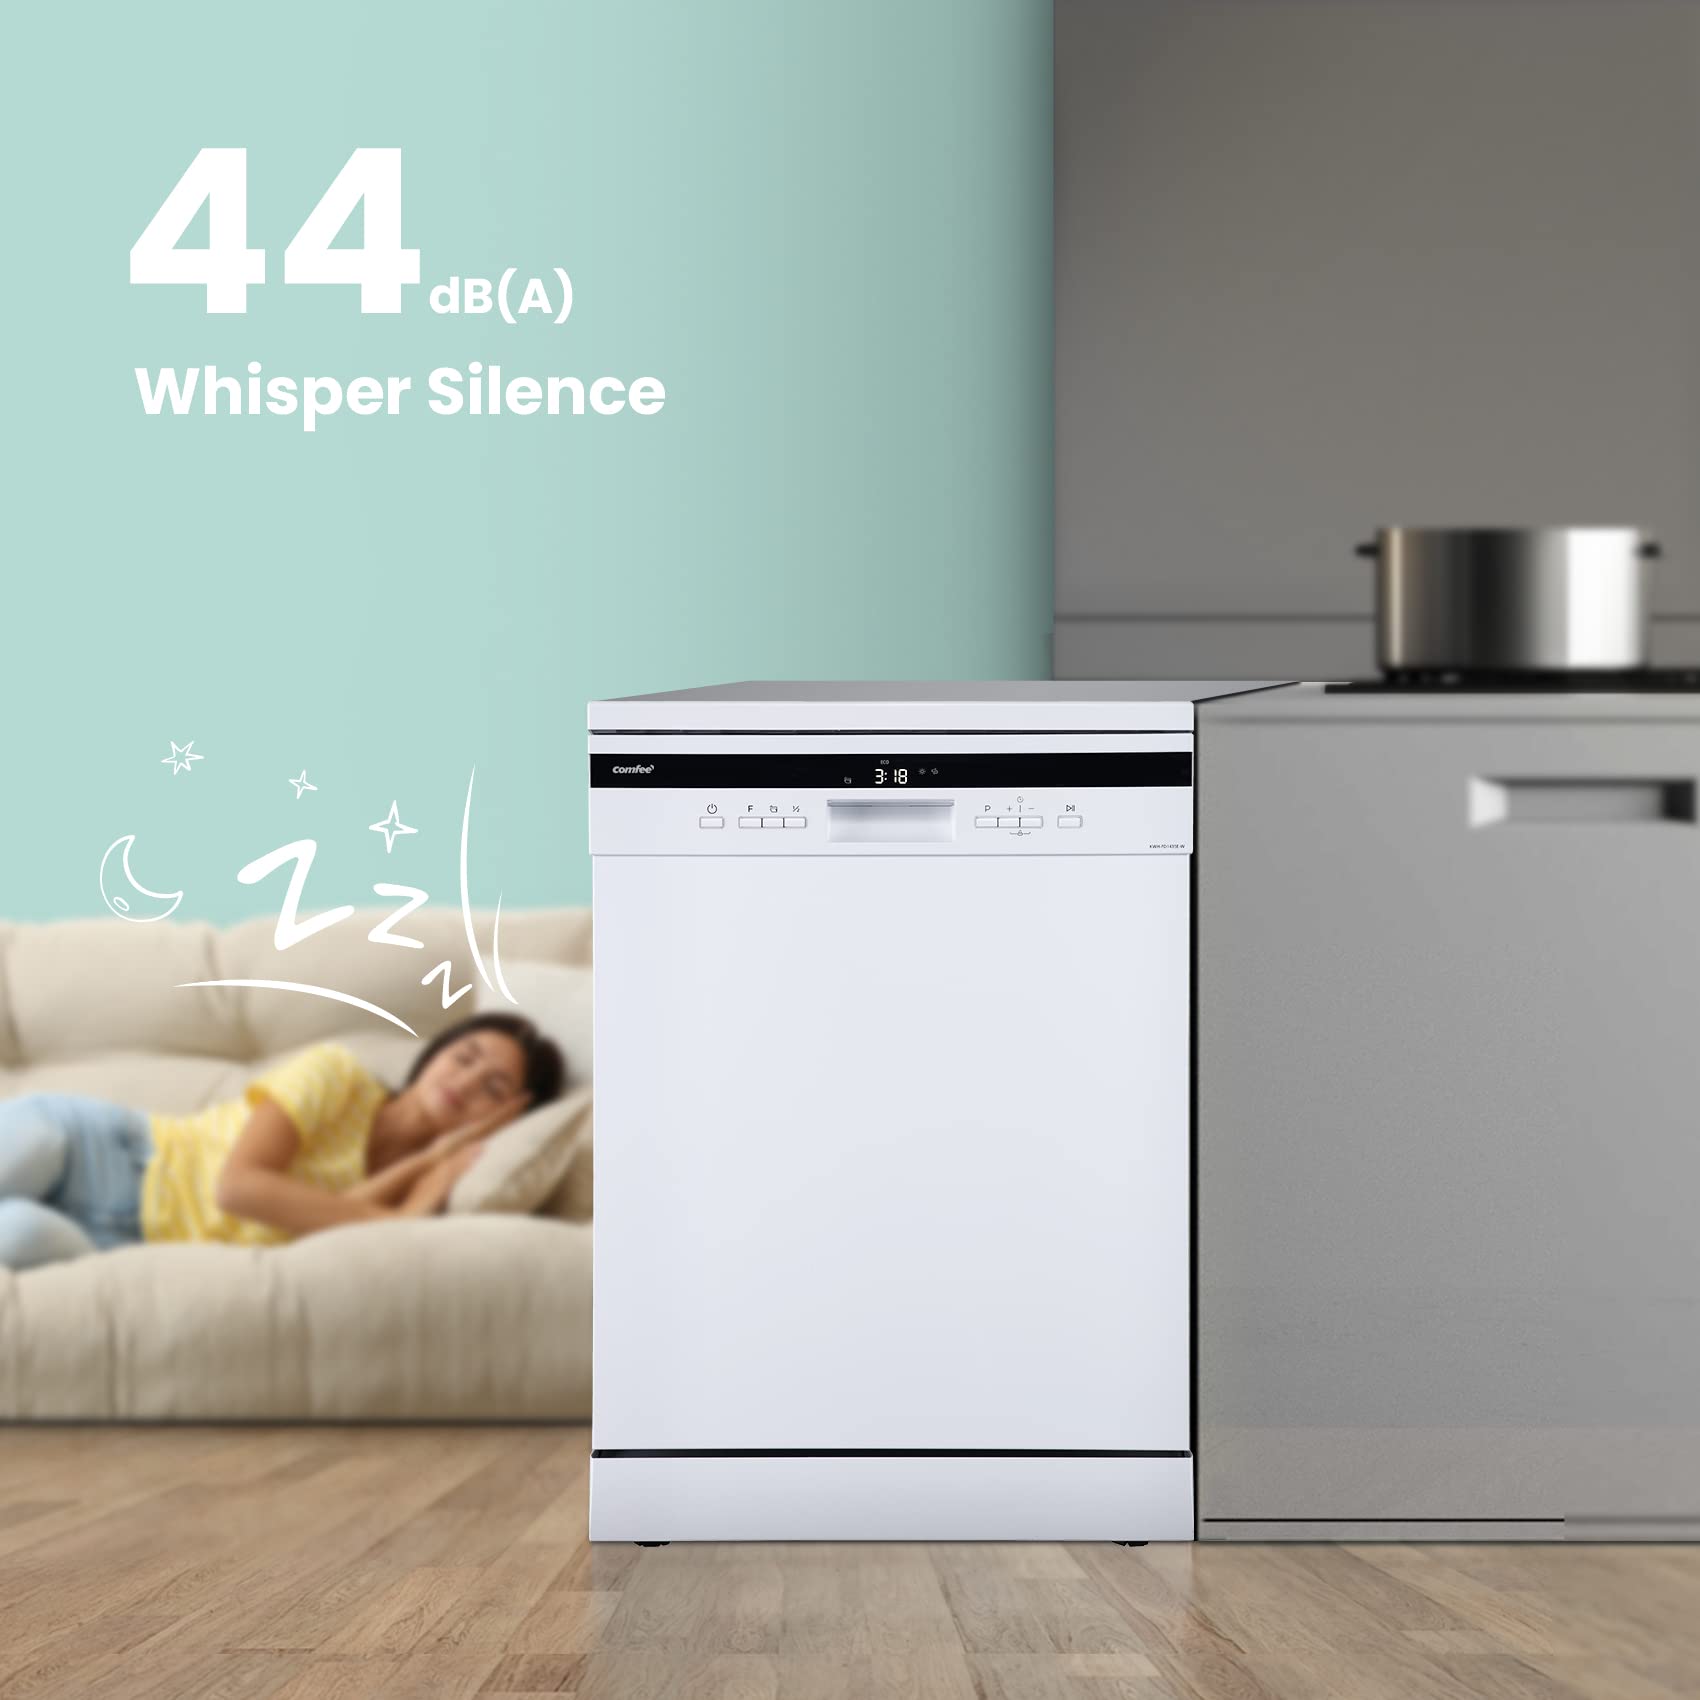 COMFEE' Freestanding Dishwasher FD1435E-W with 14 place settings, Full Size, 44dB, Wide LED Display, Delay Start, Half Load Function, Flexible Racks, White (KWH-FD1435E-W)